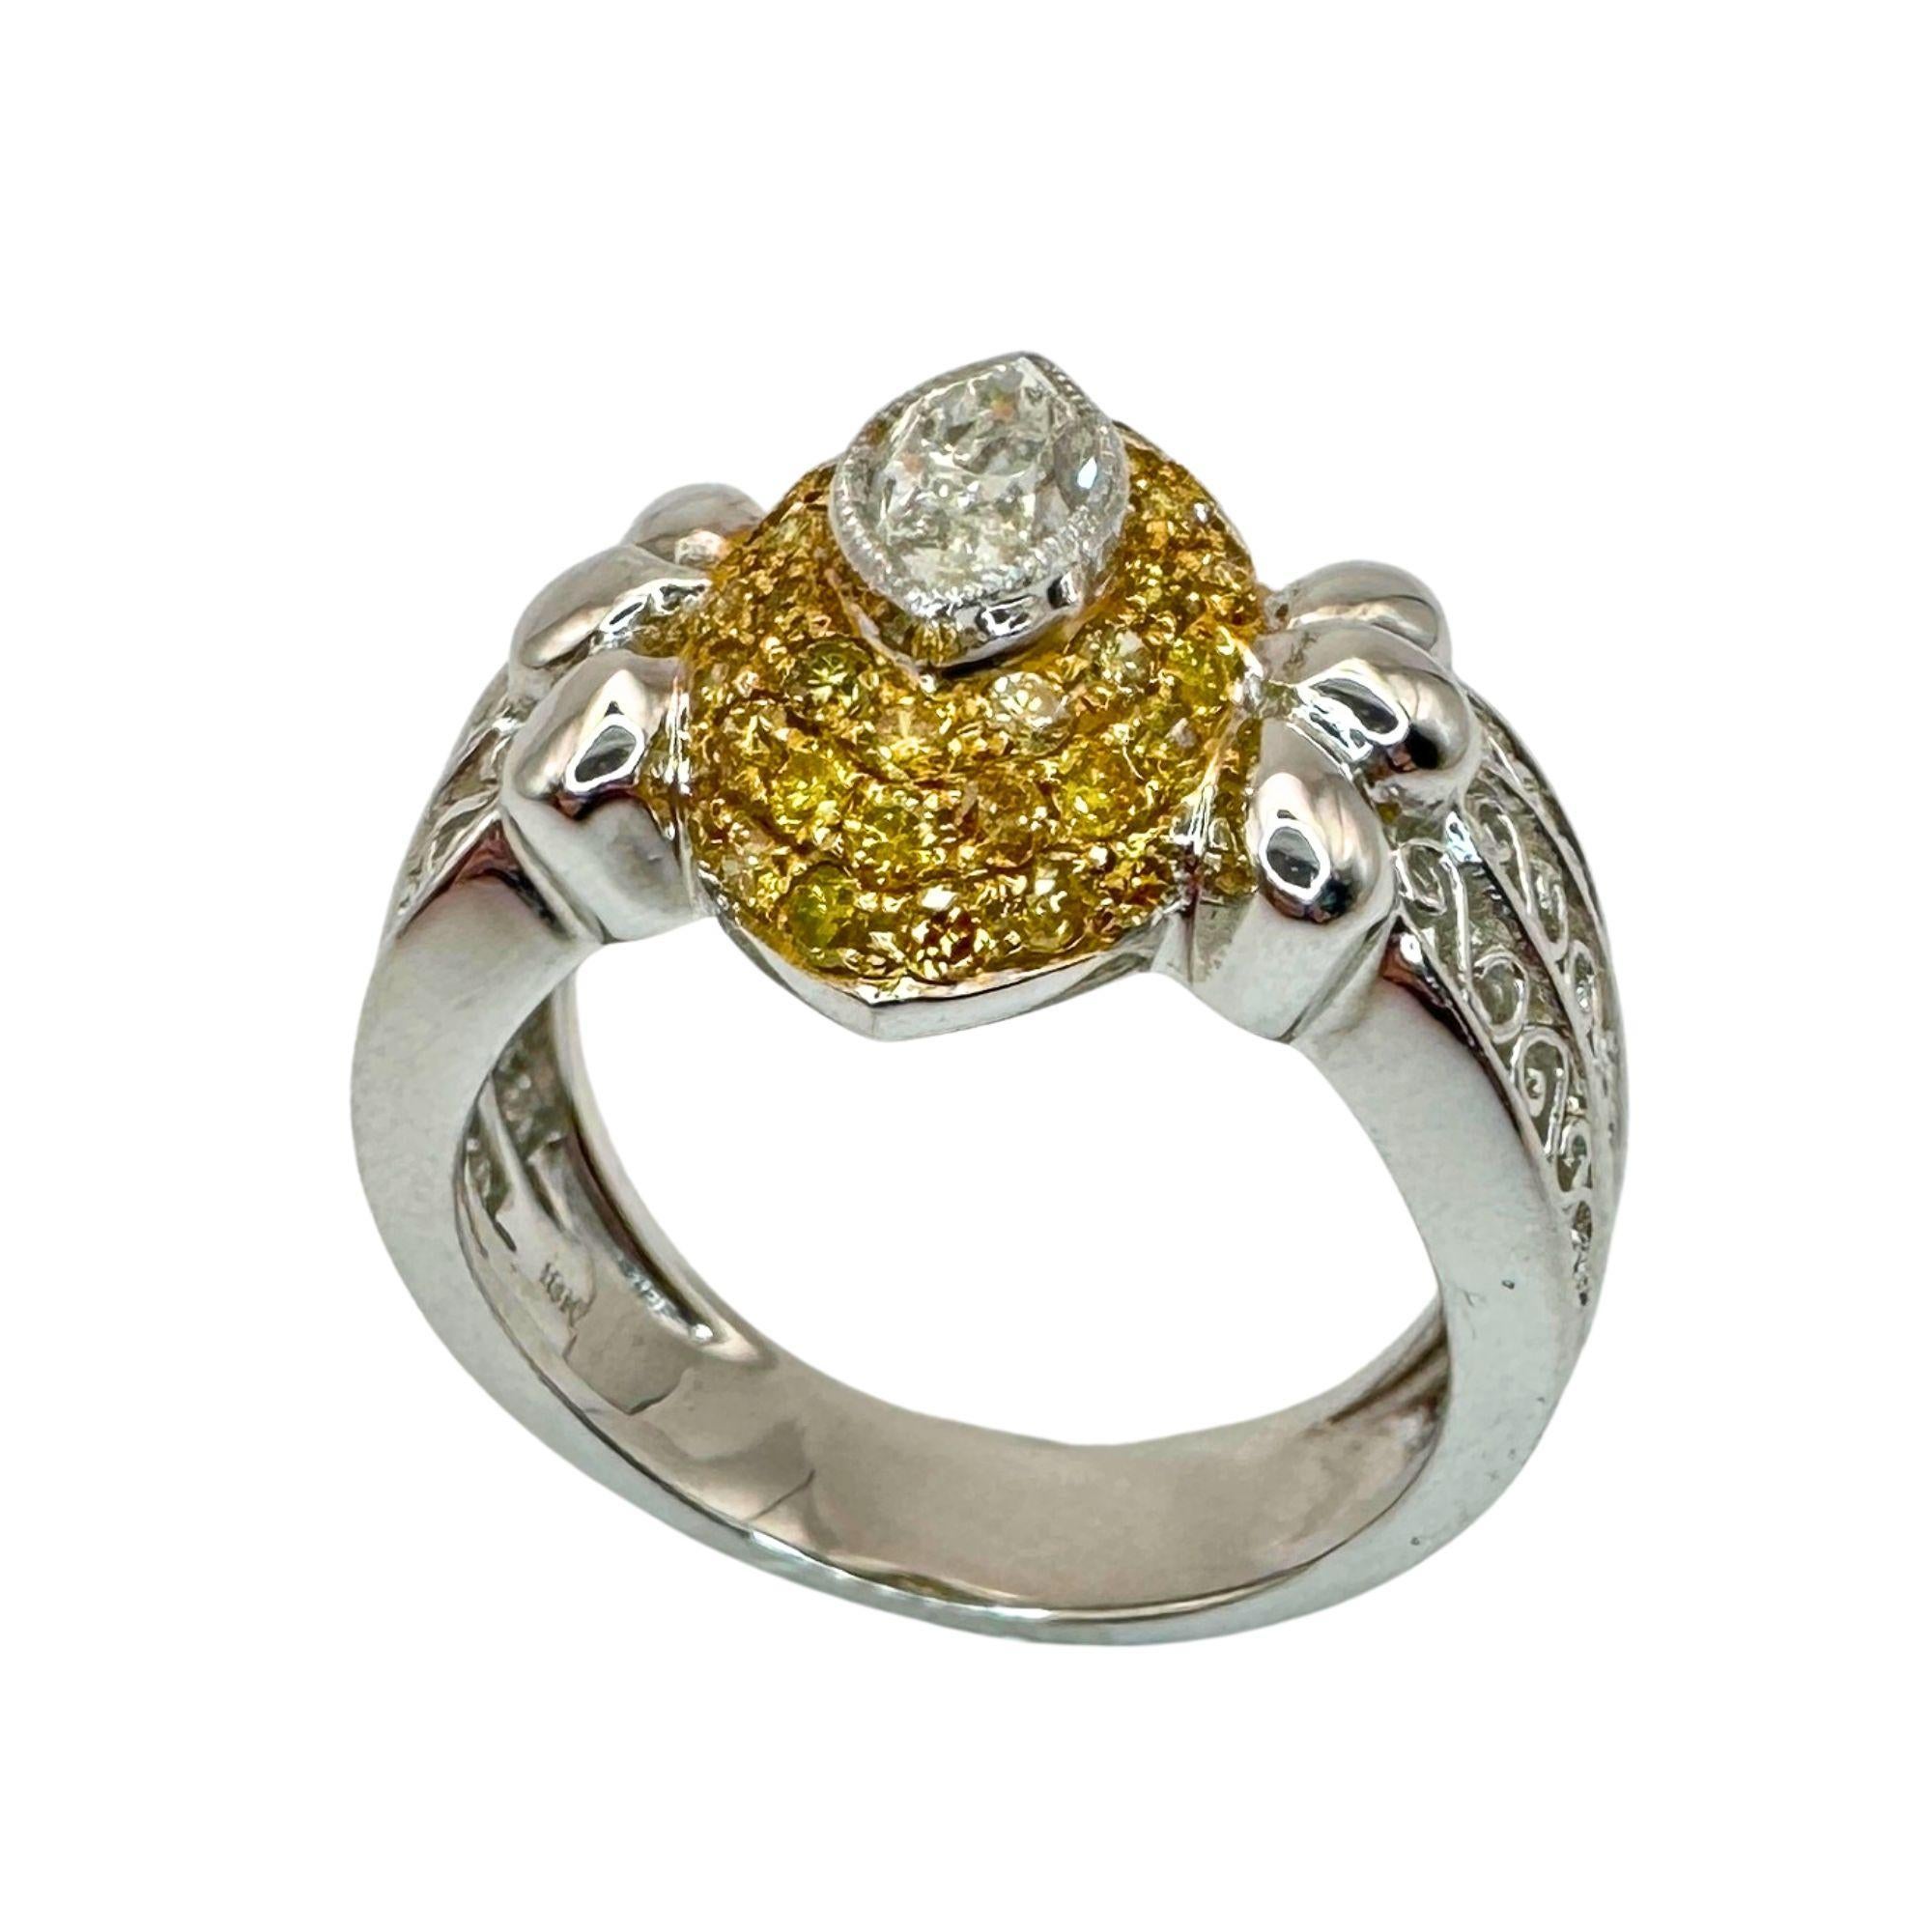 This 18k White Gold Marquise Cut Diamond and Yellow Diamond Ring, marked with 